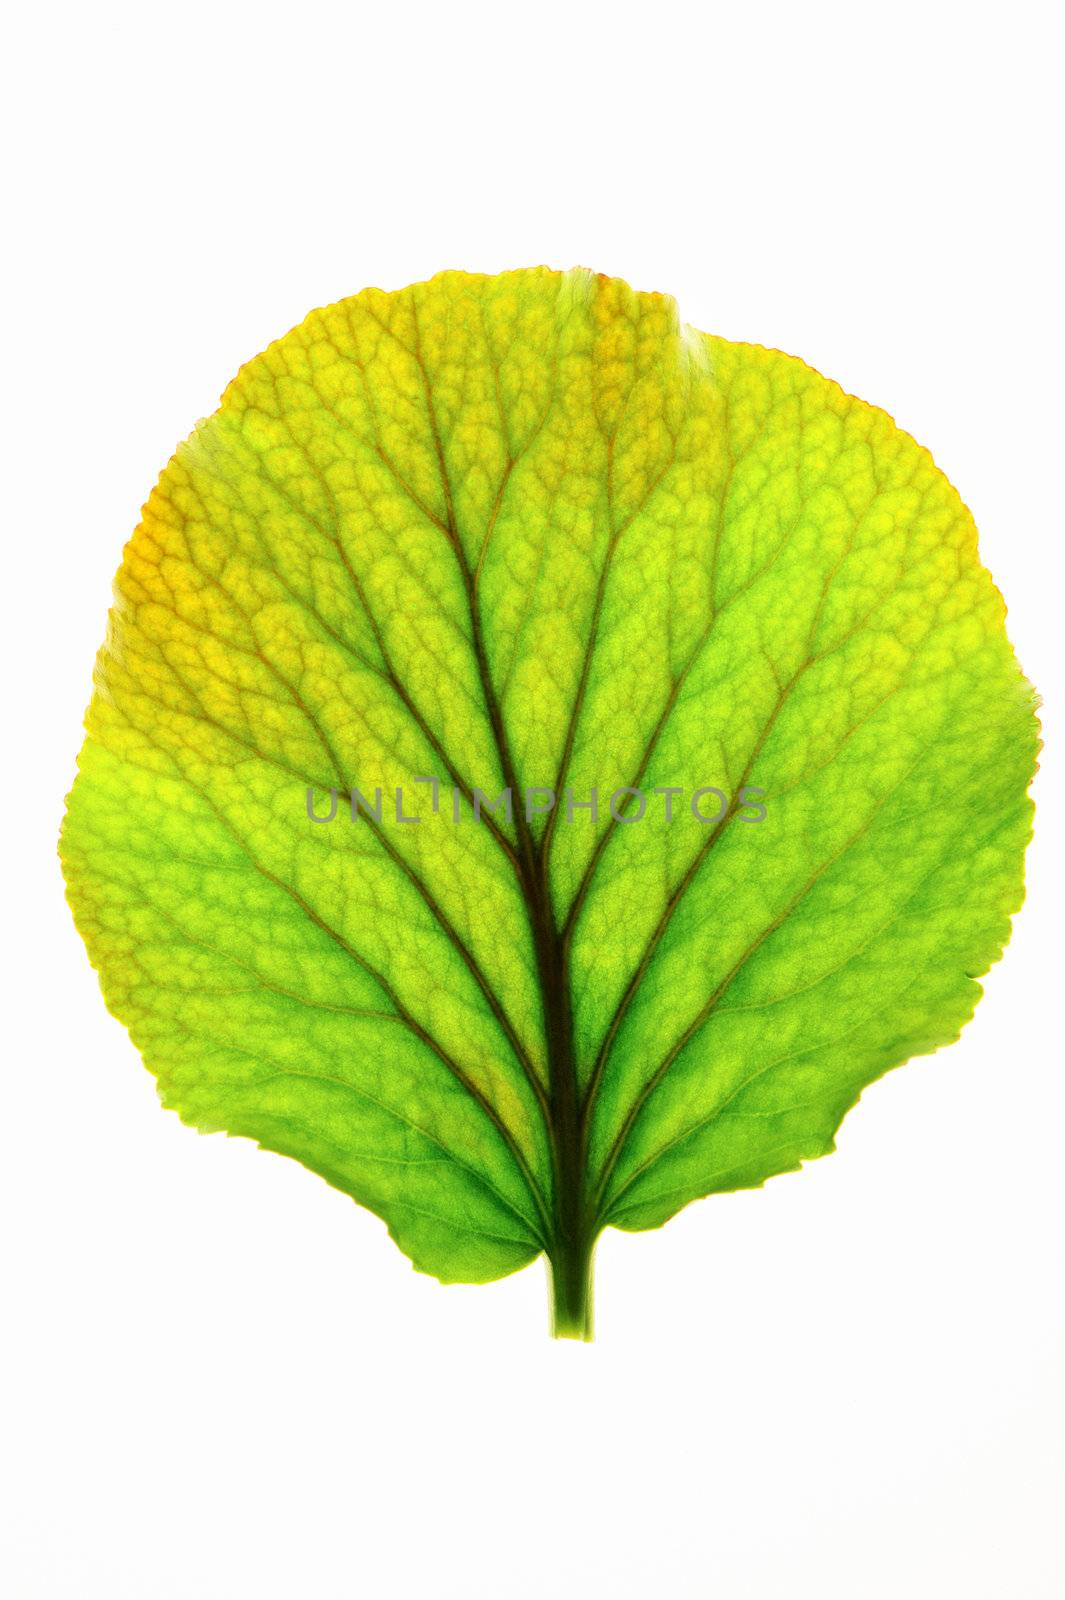 Green leaf with dark streaks on the white background